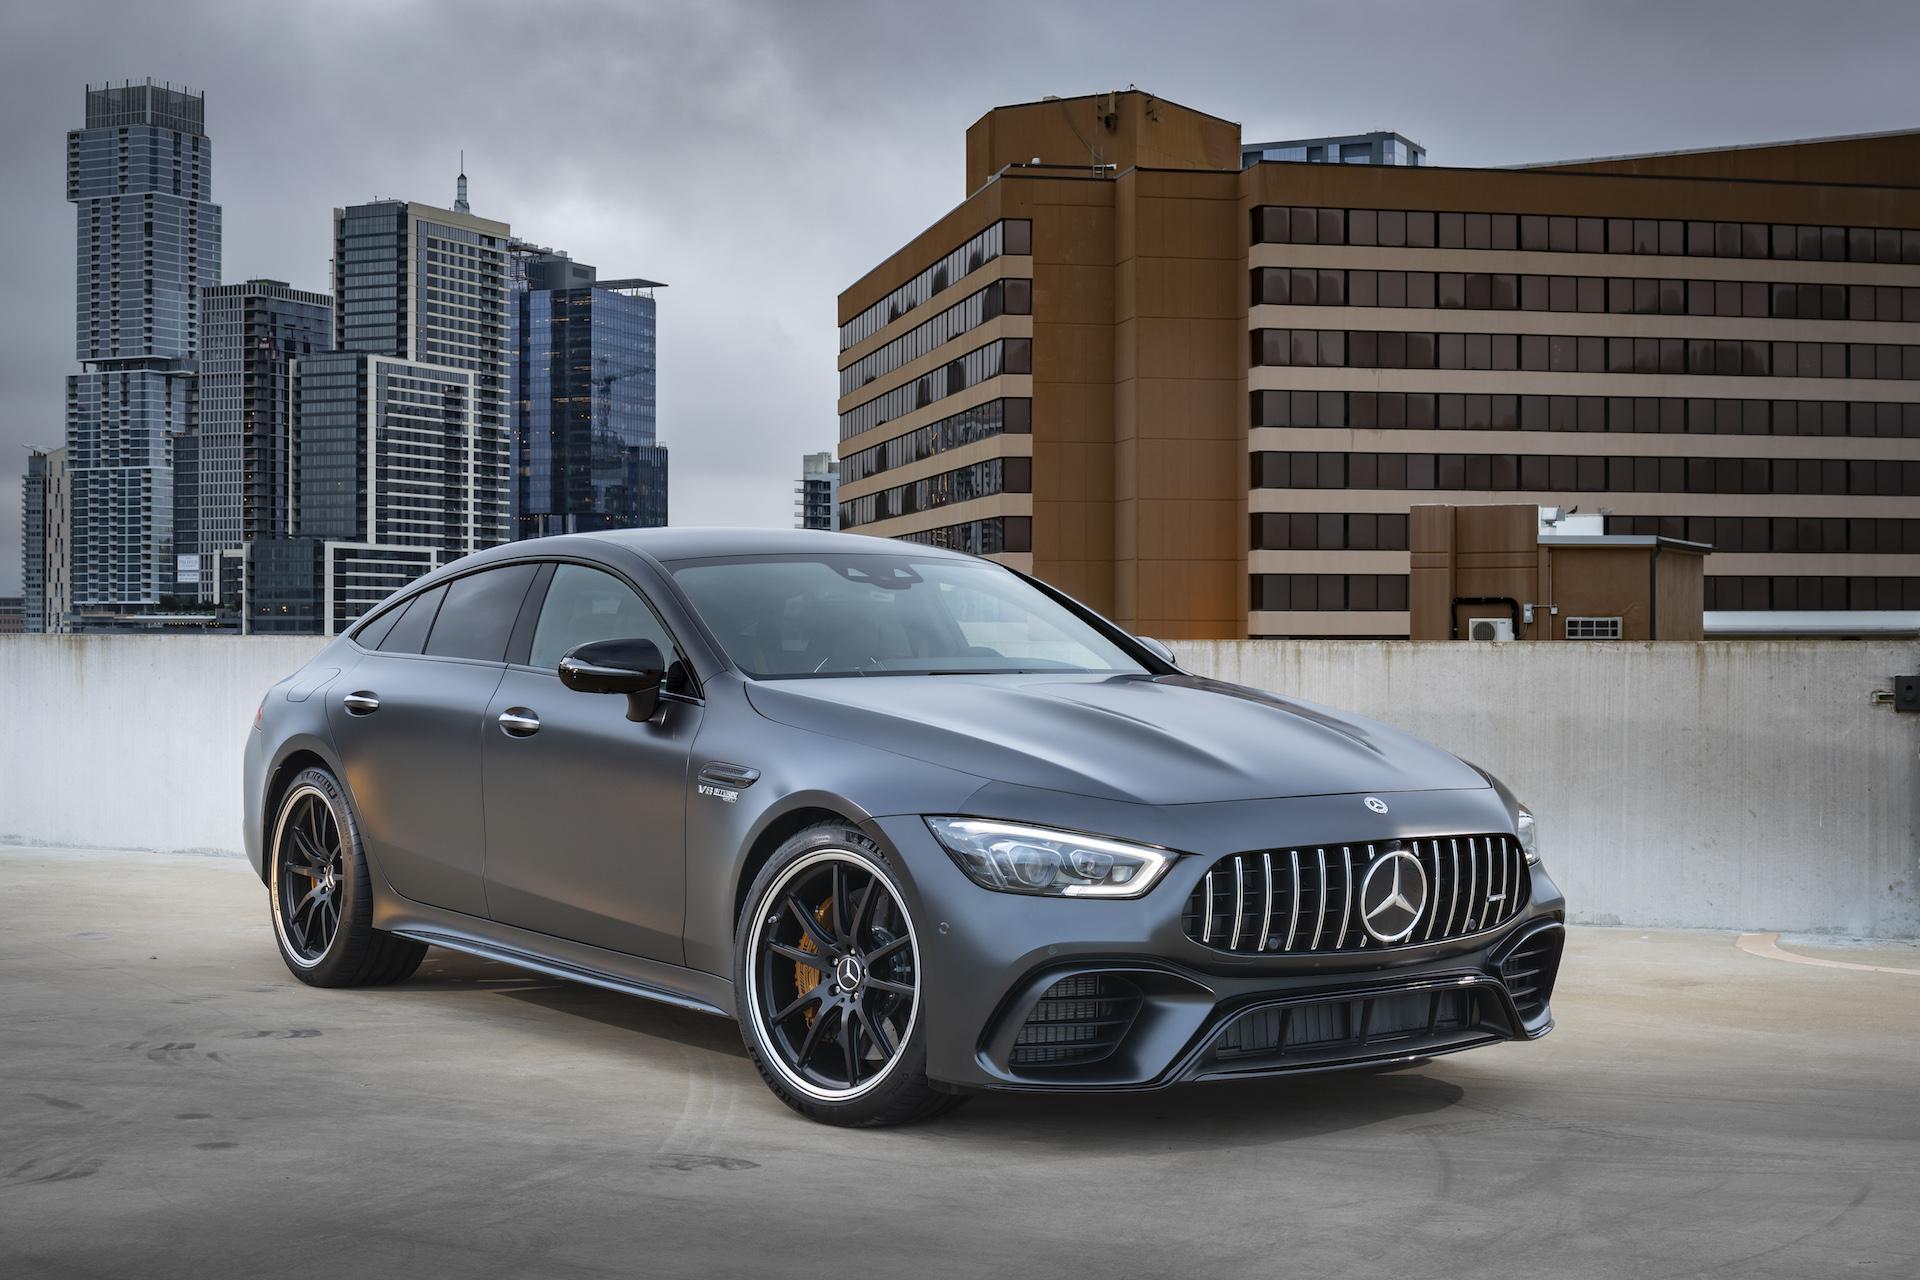 Mercedes AMG GT 4 Door Coupe Likely To Spawn Hybrid Model With More